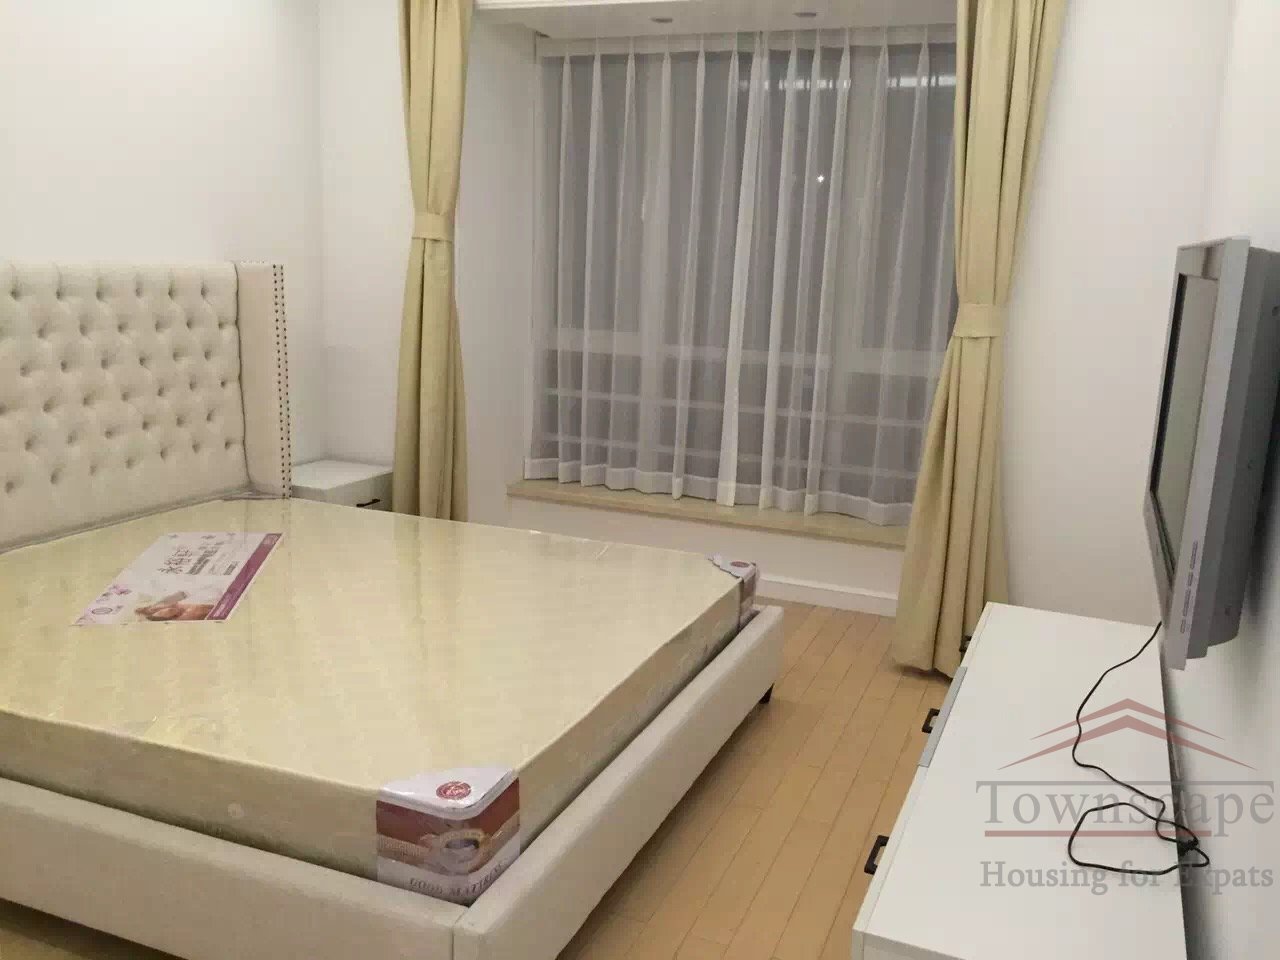 Changning family apartment Clean 4BR Family Apartment Apt in Oasis Riviera @Weining Road Metro, Changning